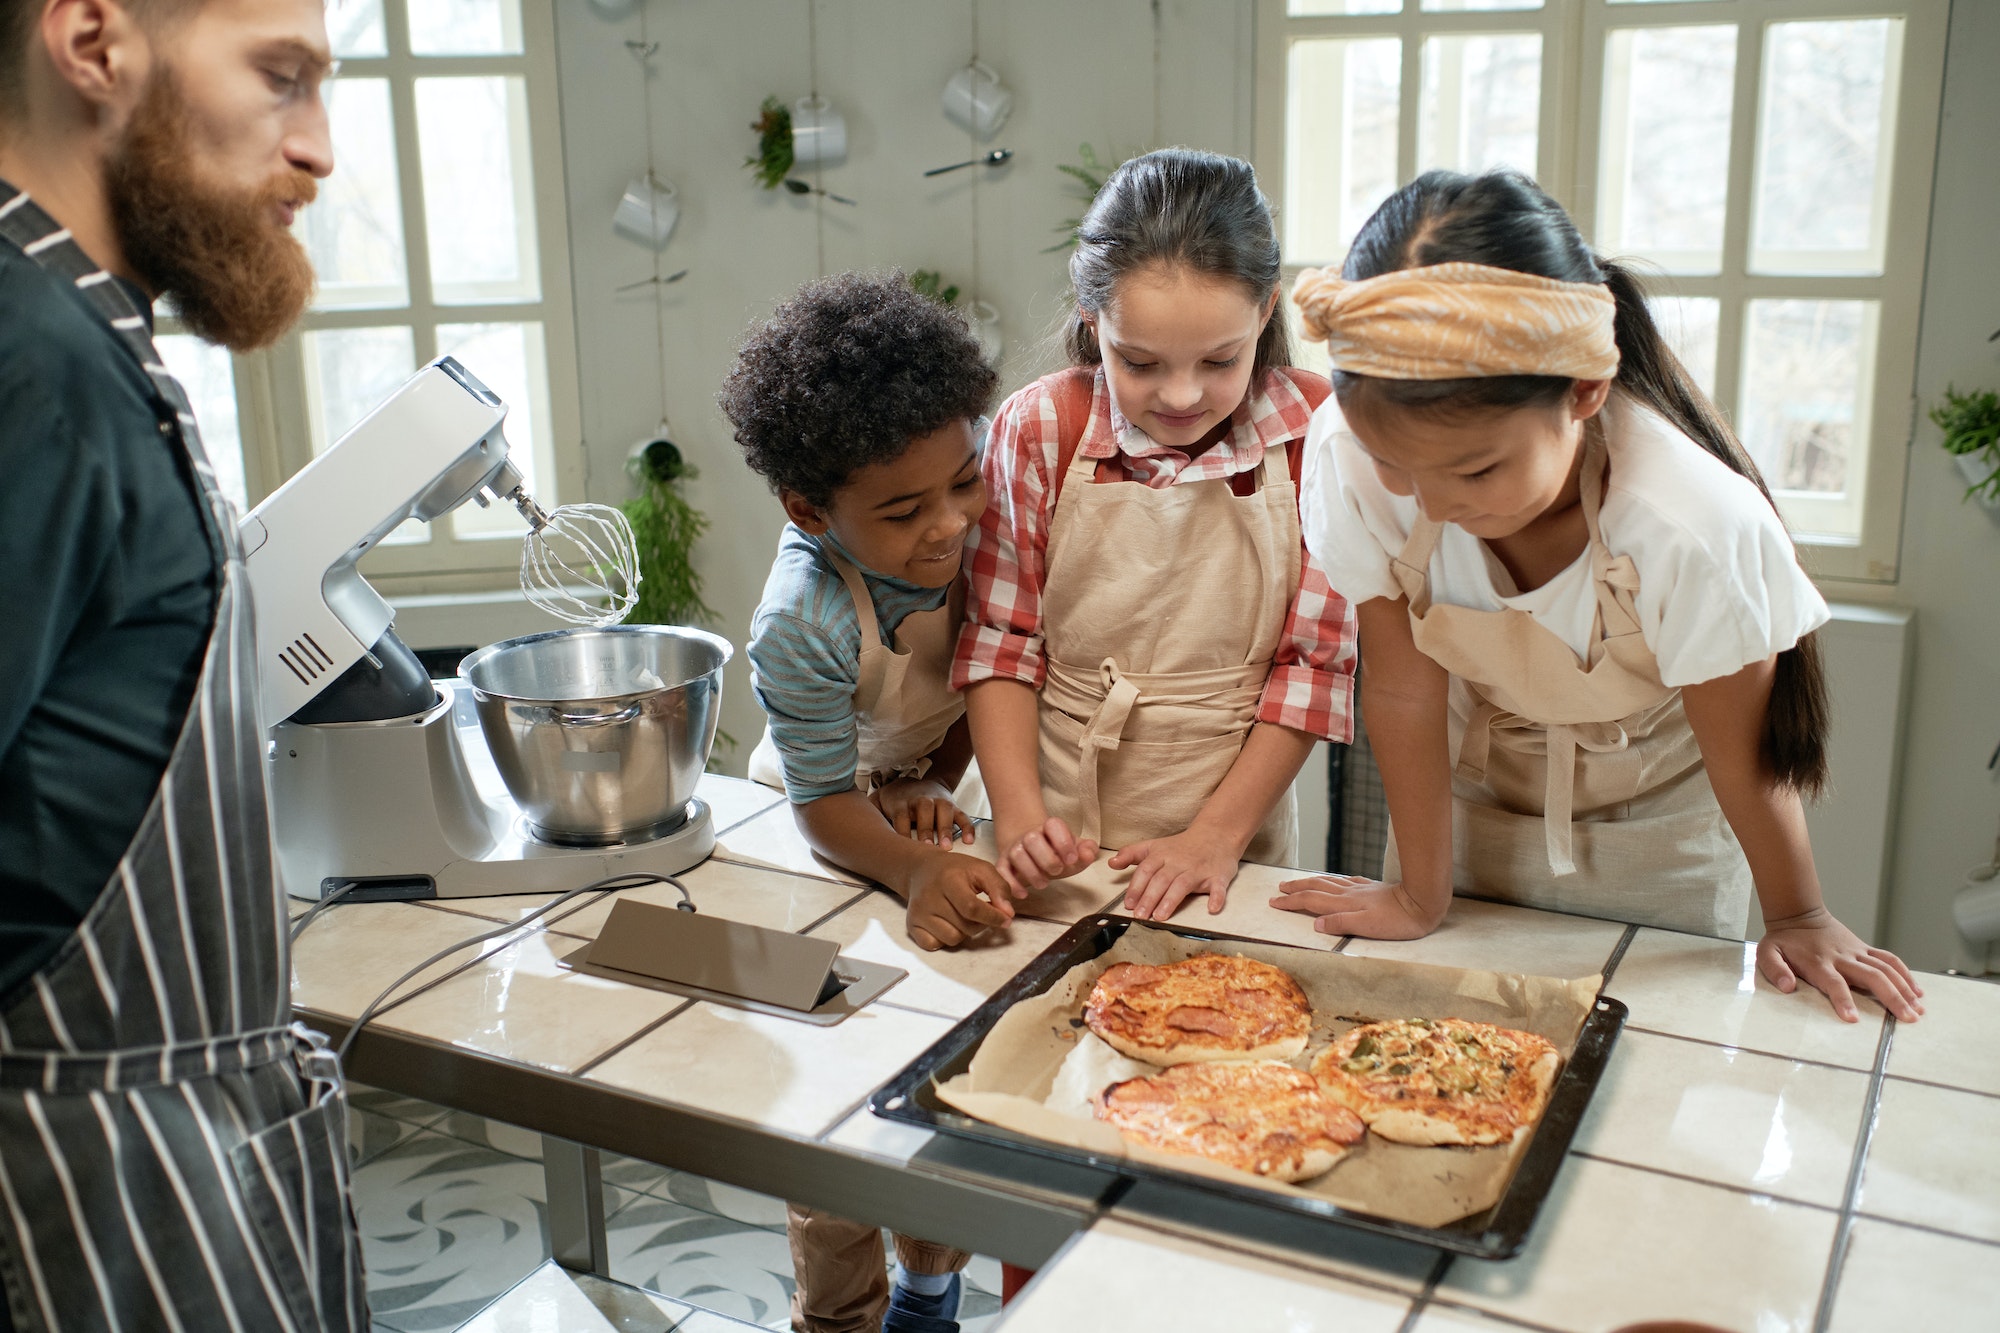 Children making pizza with the chef